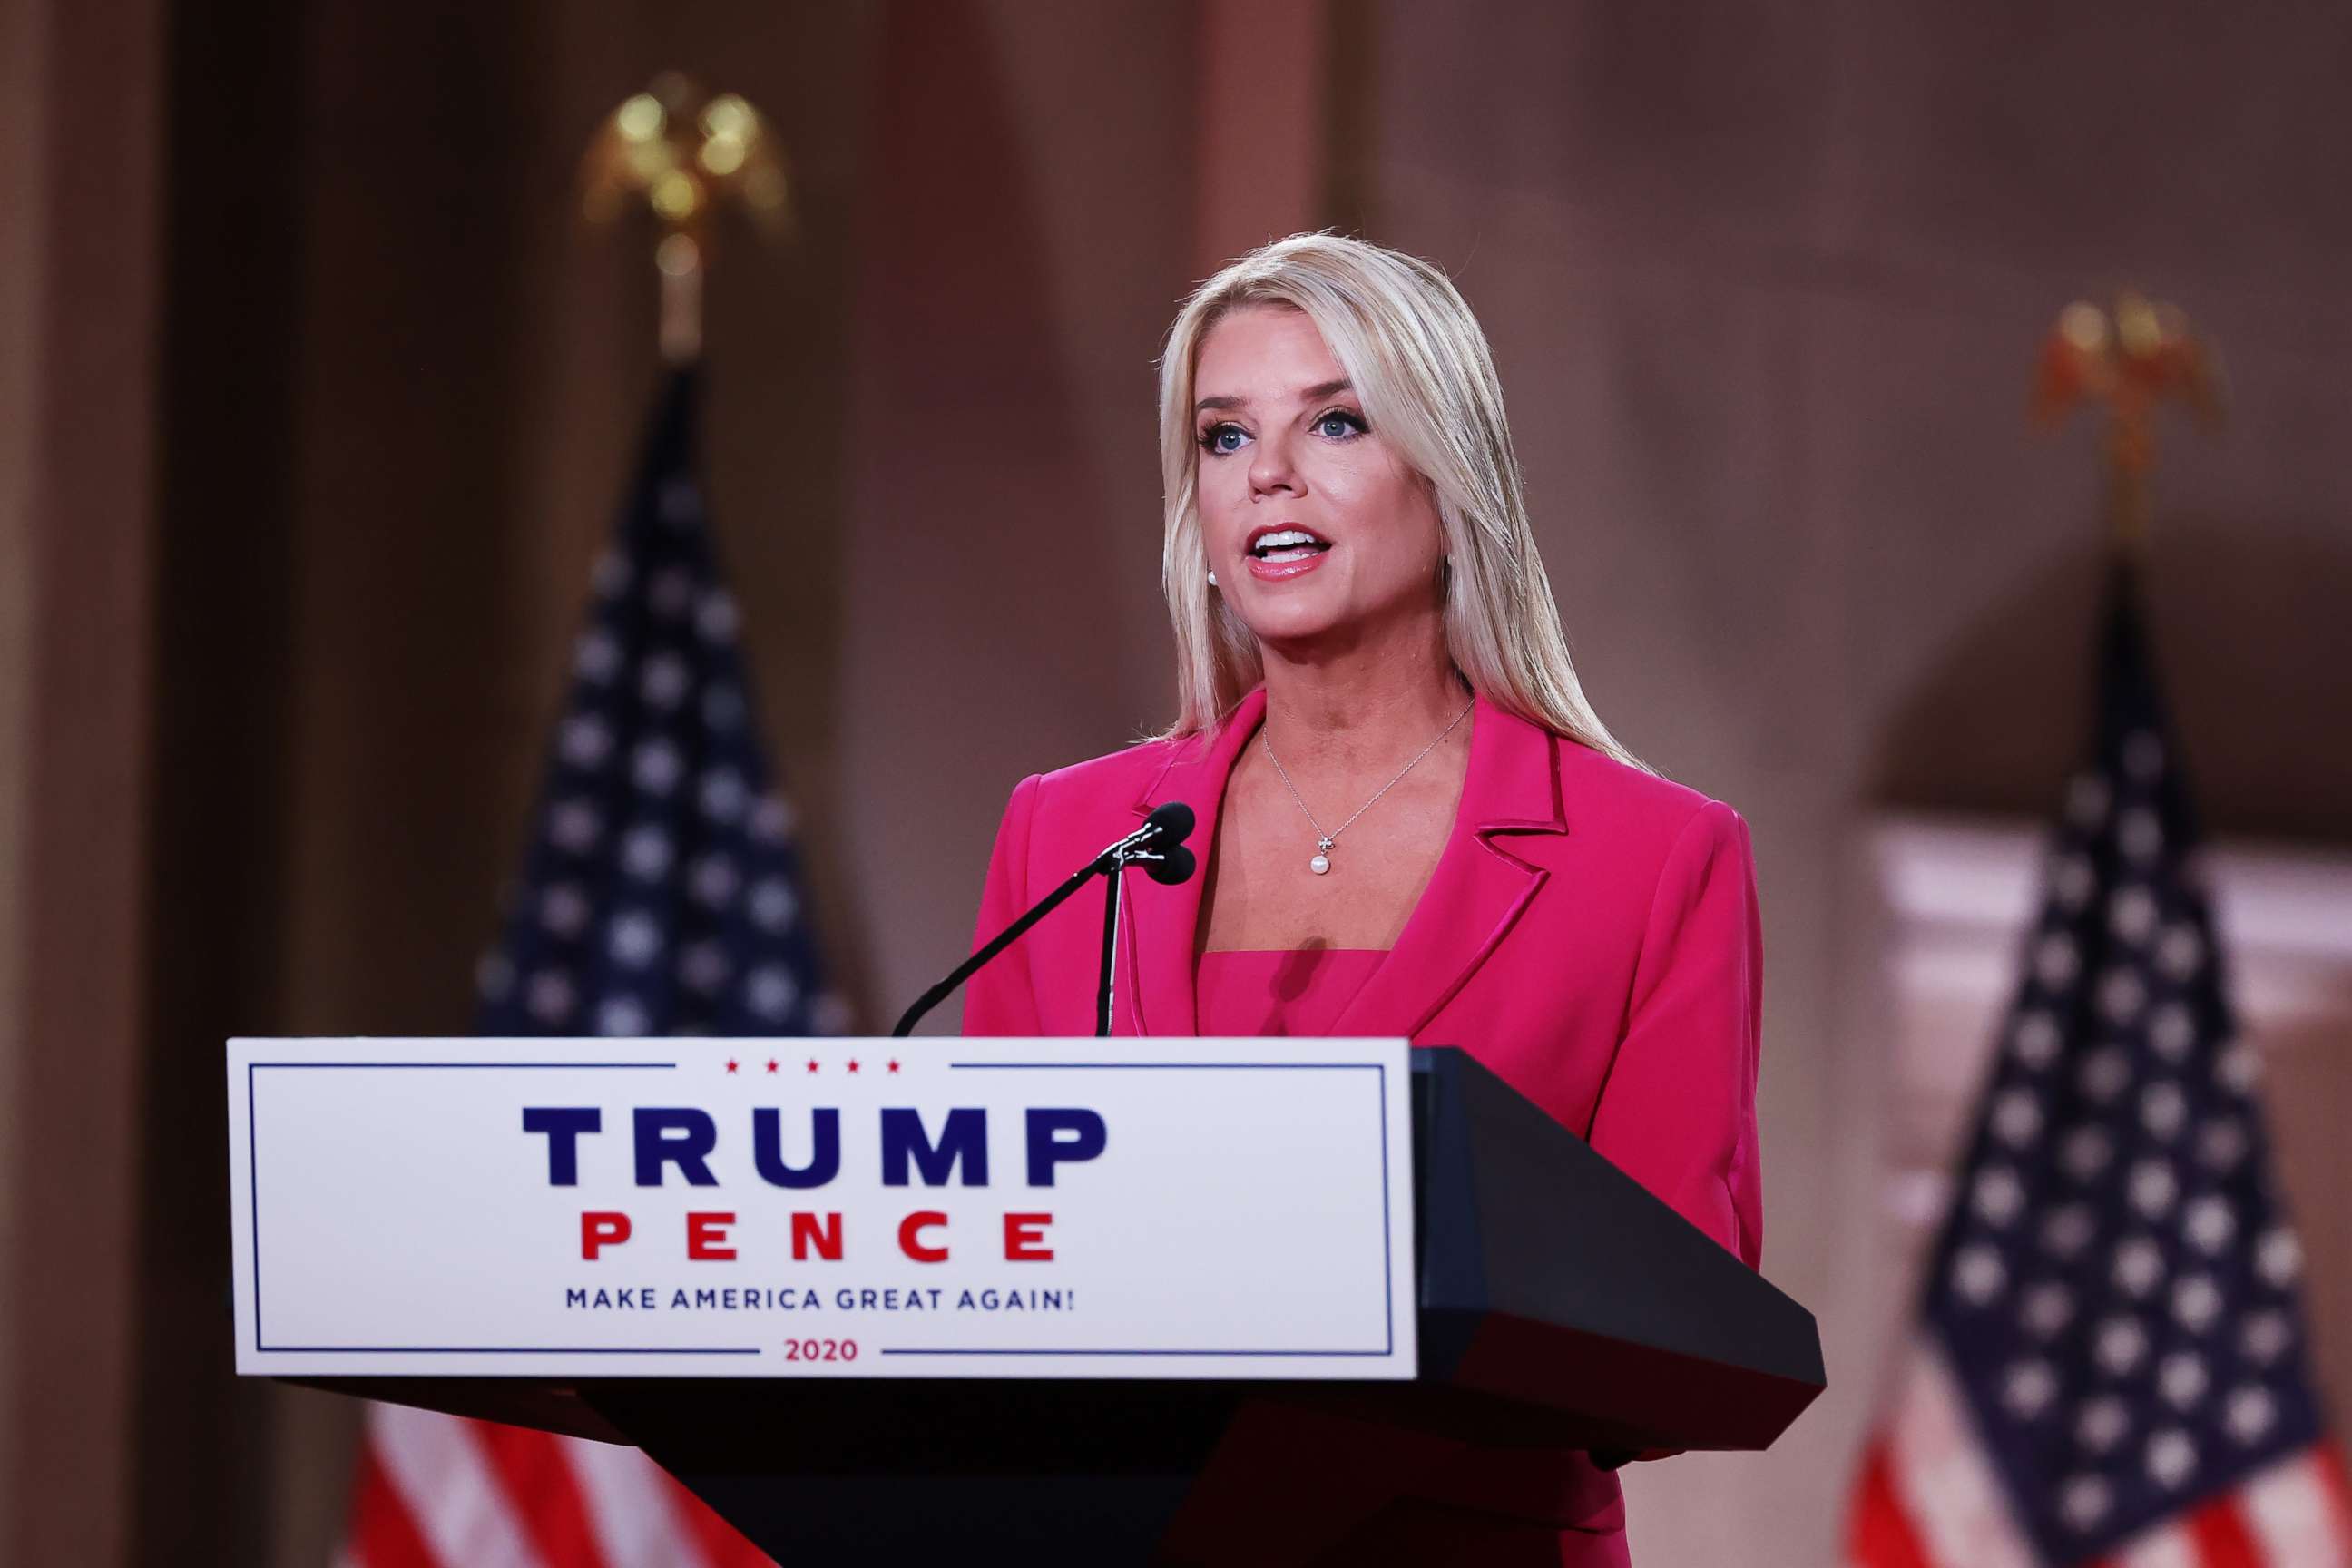 PHOTO: Former Florida Attorney General Pam Bondi takes to the podium at the Mellon Auditorium to address the Republican National Convention, Aug. 25, 2020, in Washington.